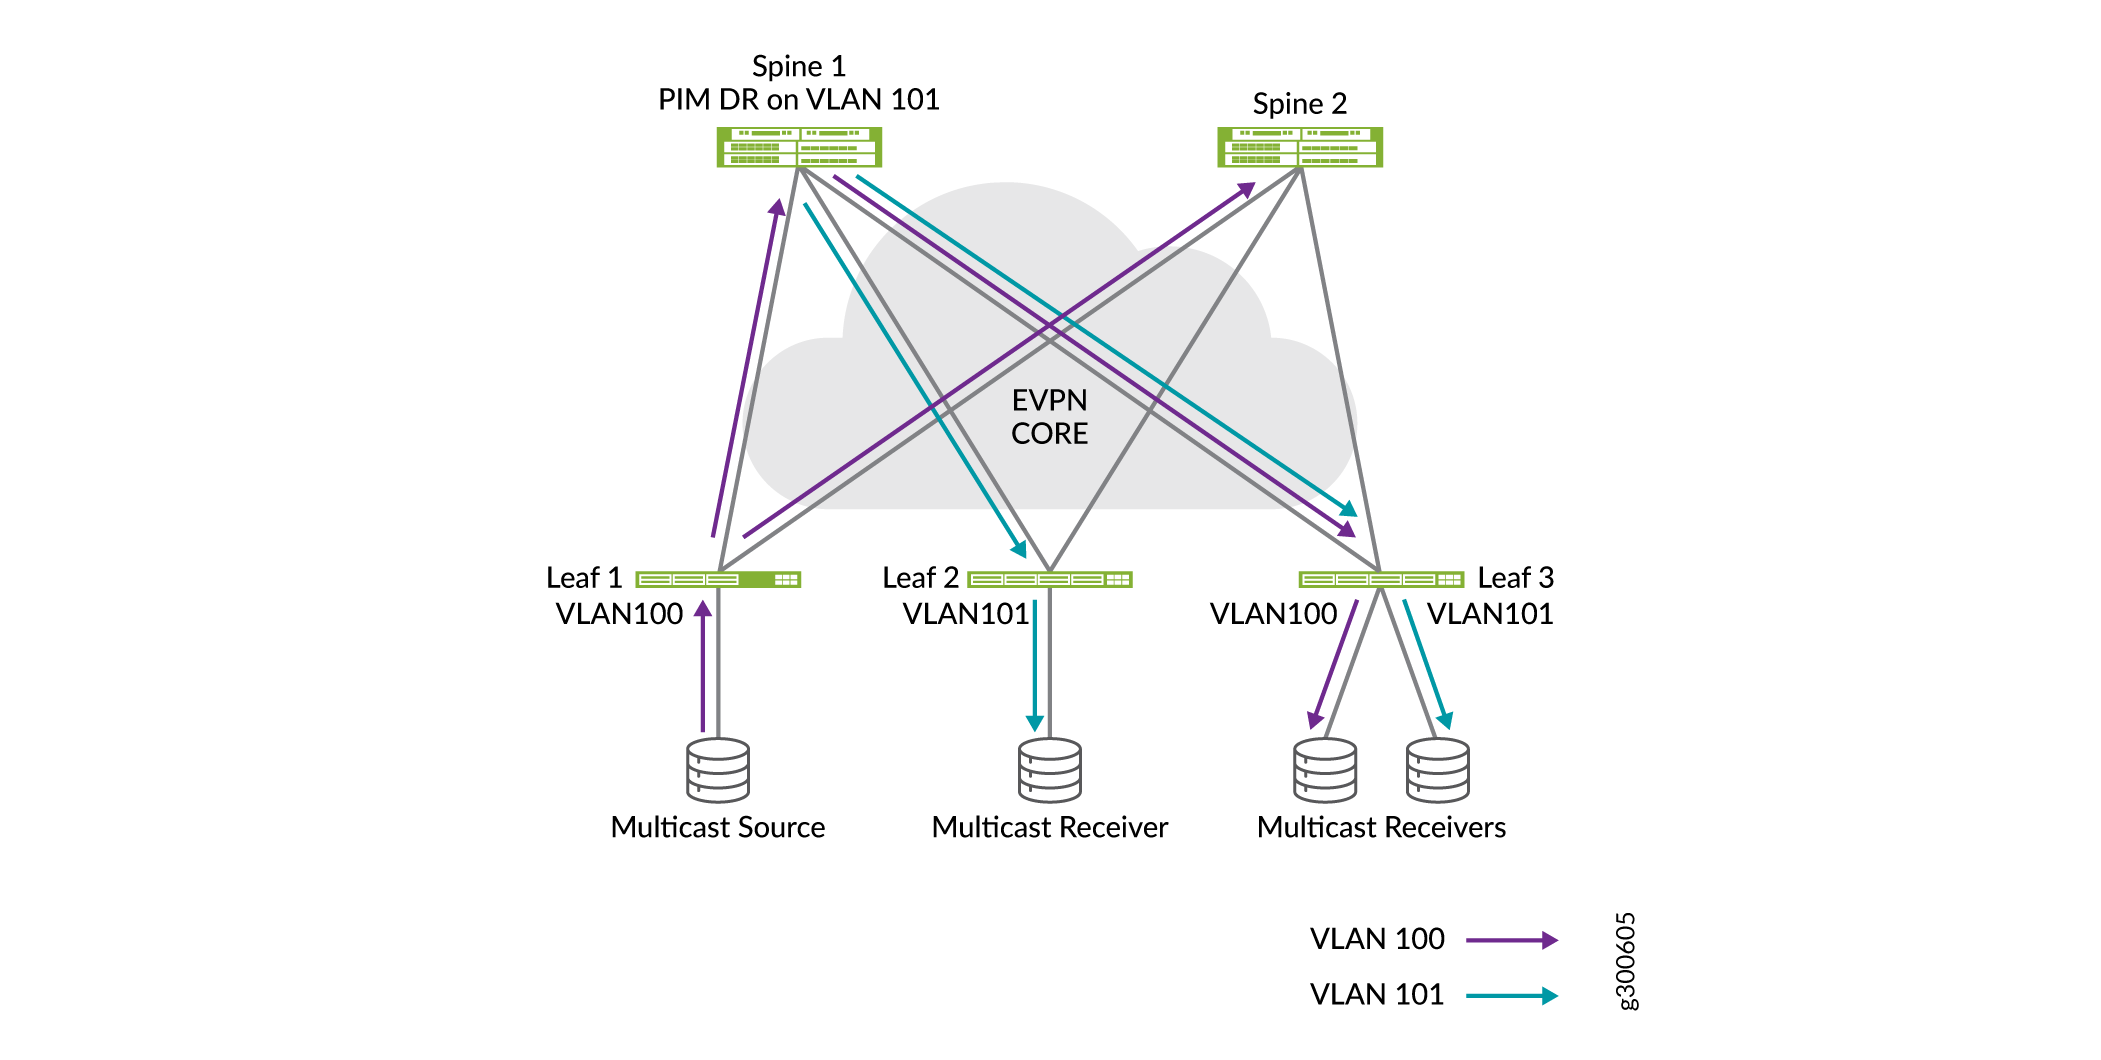 Inter-VLAN Multicast Traffic Flow with IRB Interface and PIM